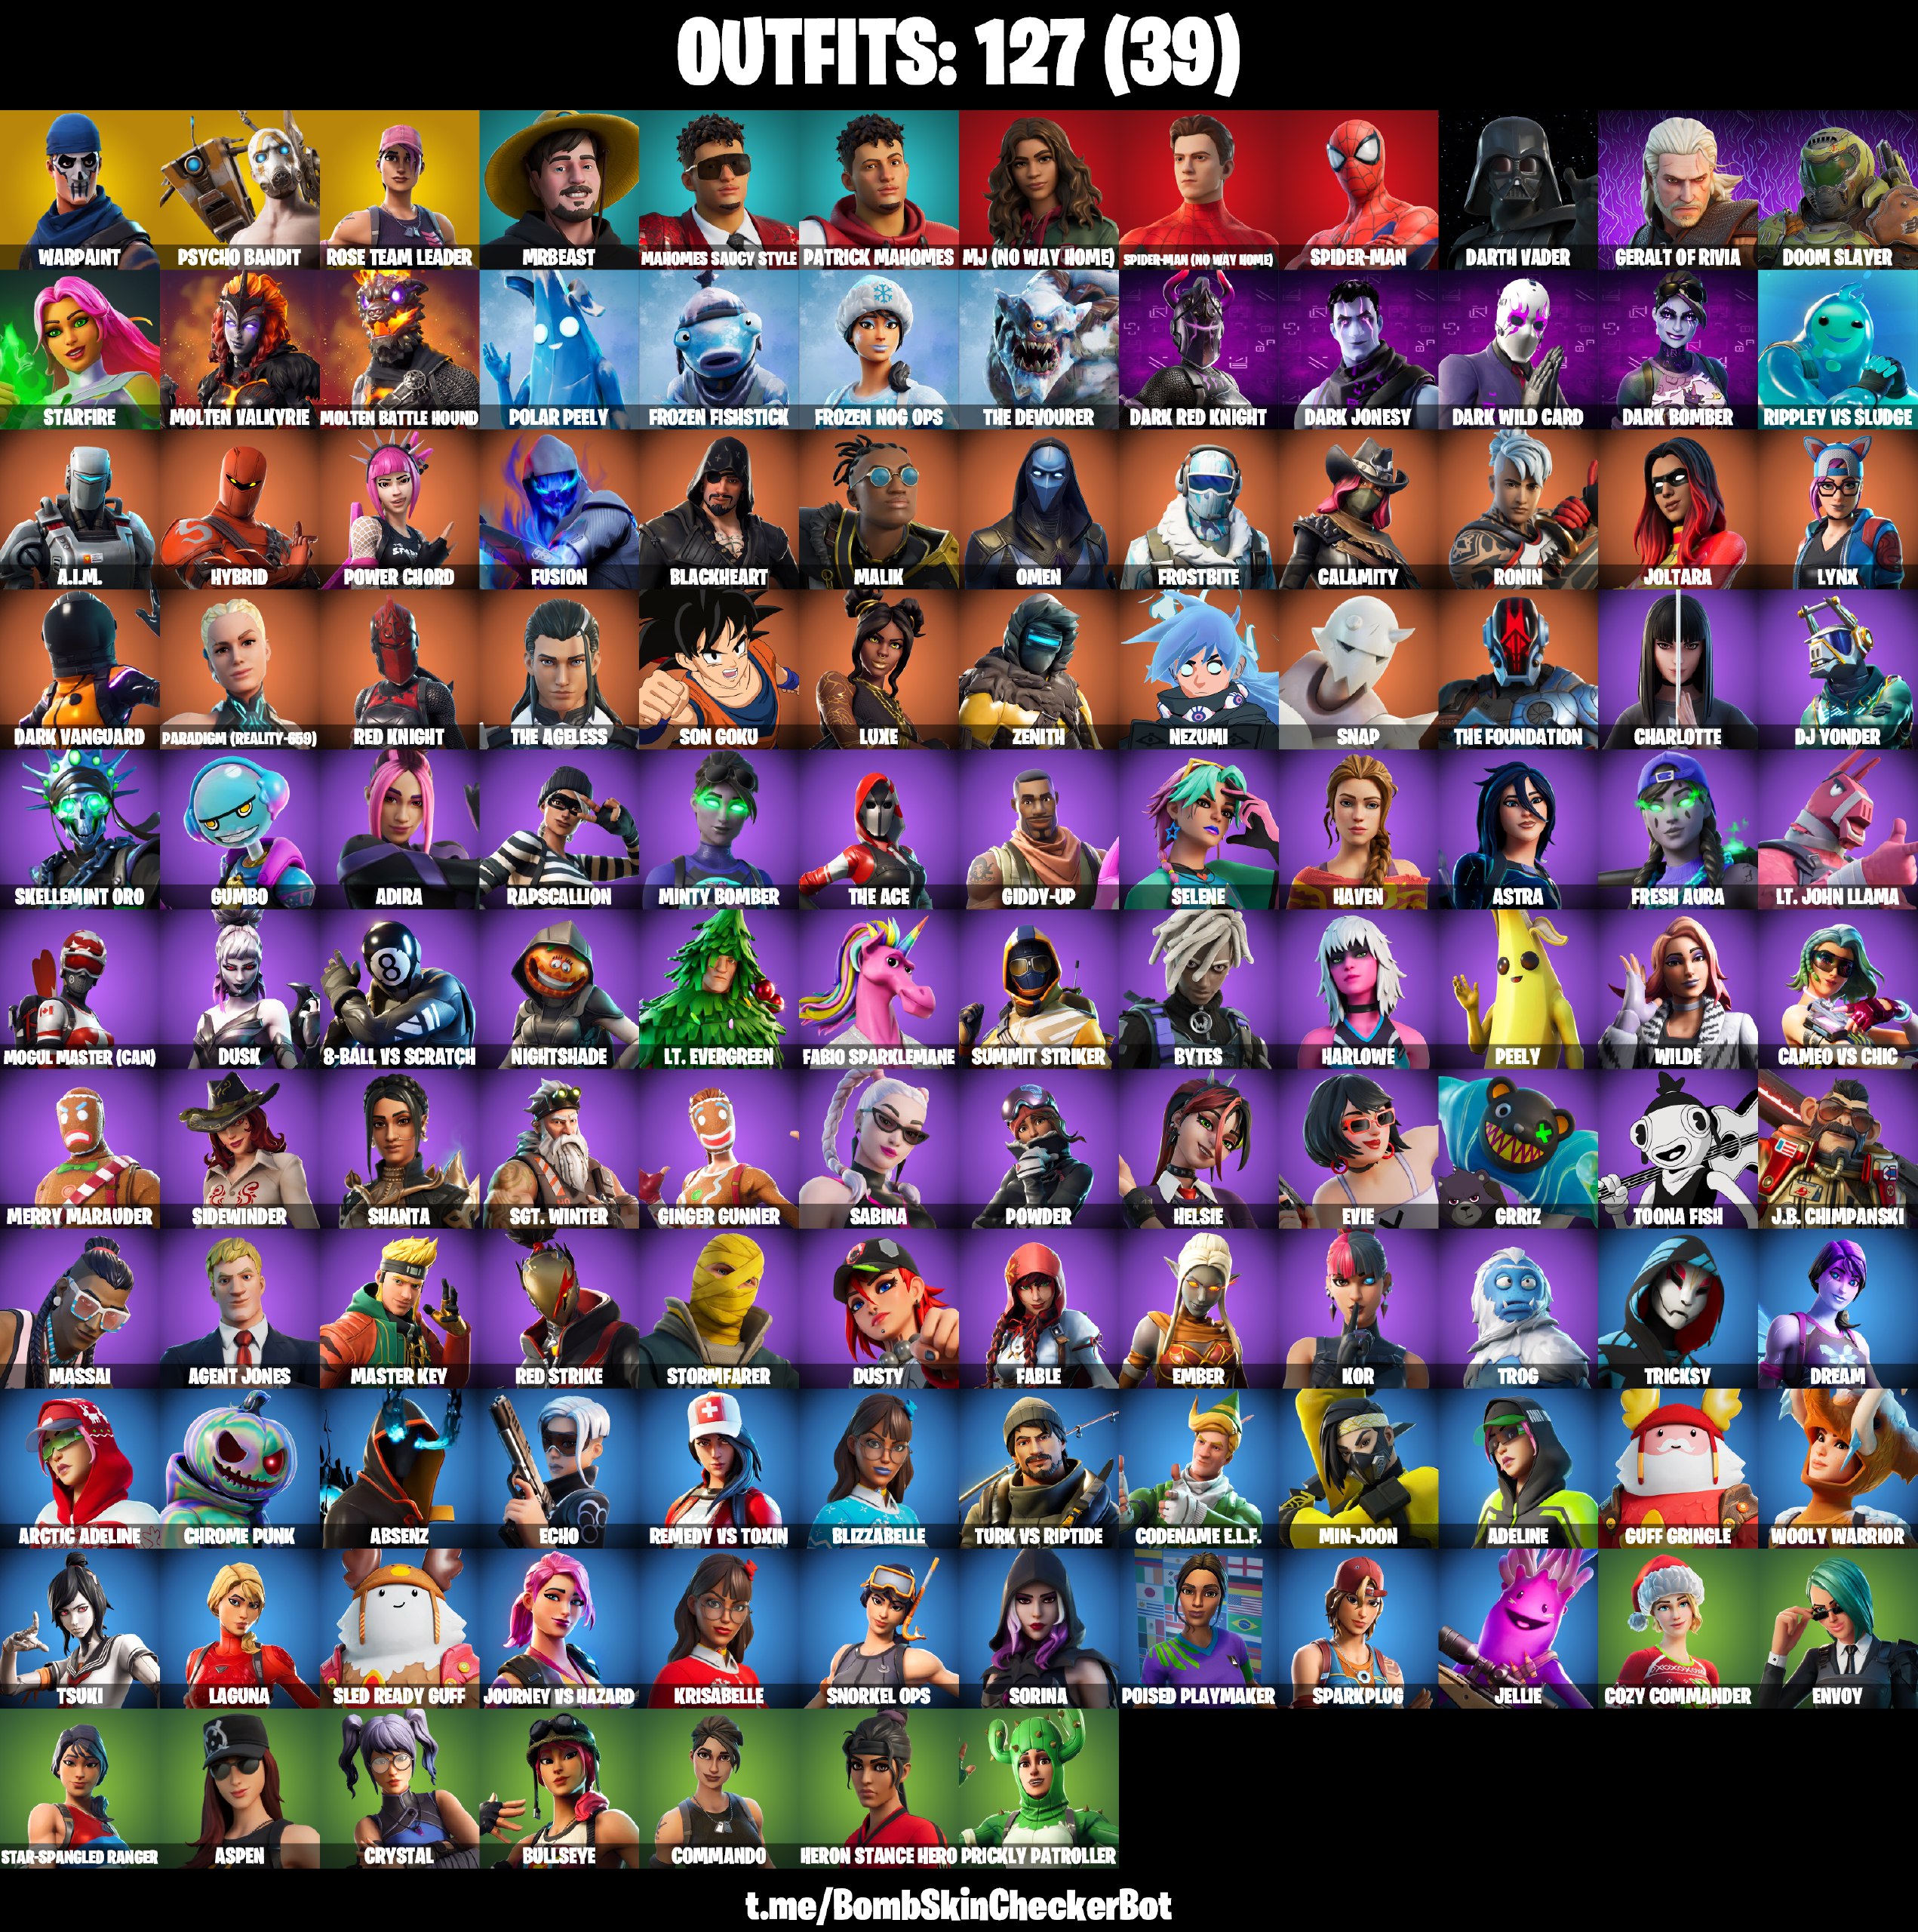 (PC) 127 SKINS // PSYCHO BANDIT // RED KNIGHT // FROSTBITE // DARK BOMBER // MOGUL MASTER // CANDY AXE // STW